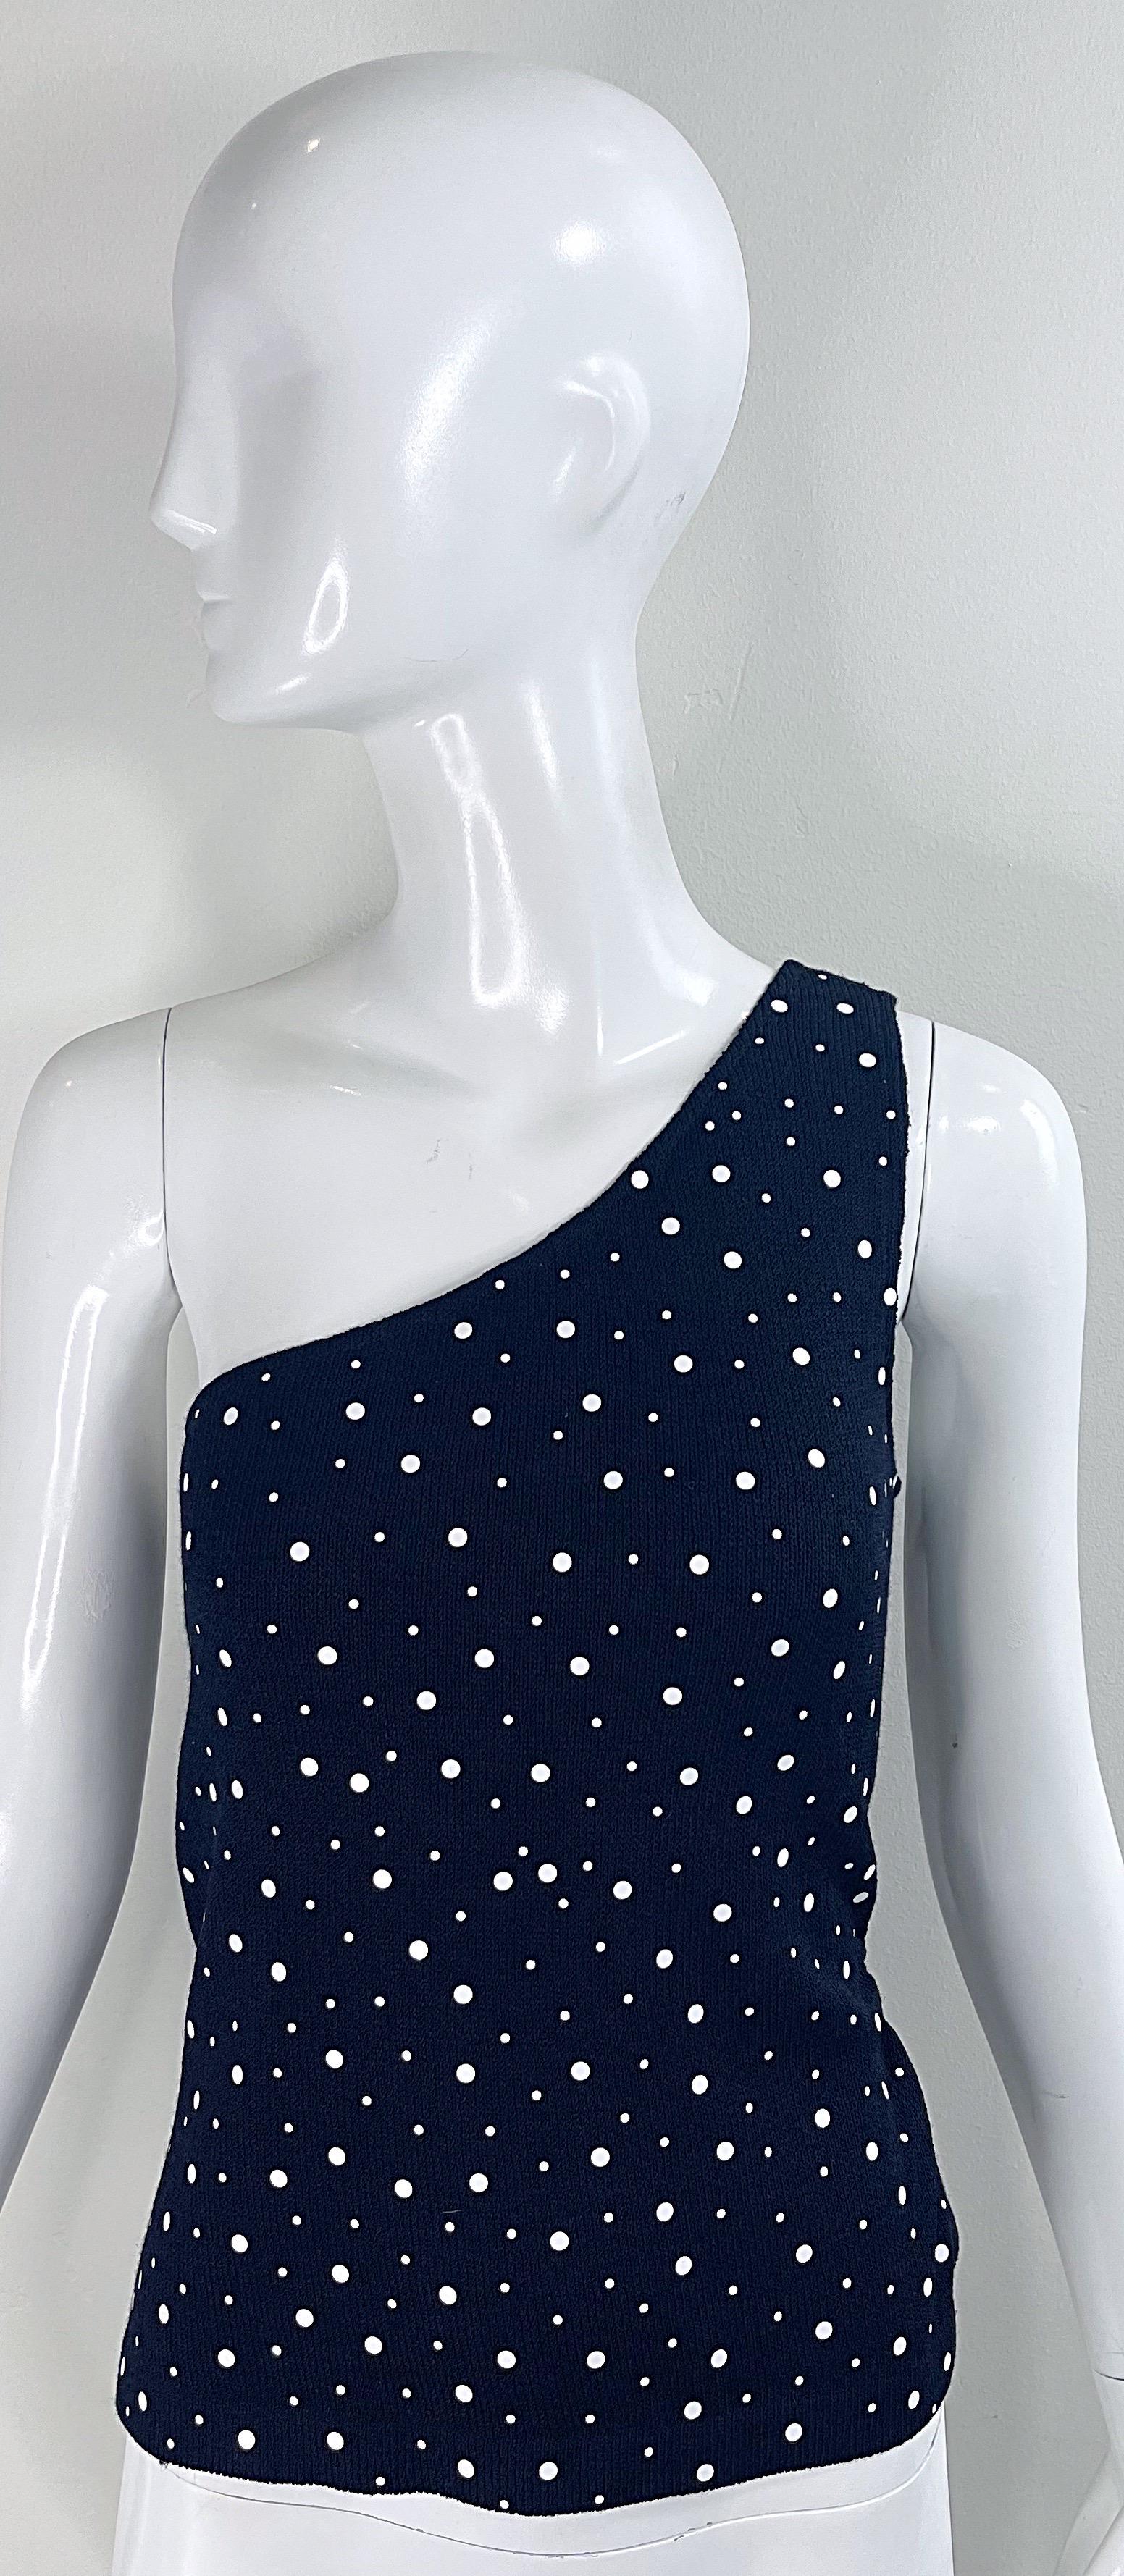 NWT 1990 I. Johns Collection by Marie Gray Size 8 Black White Polka Dot Top en vente 11